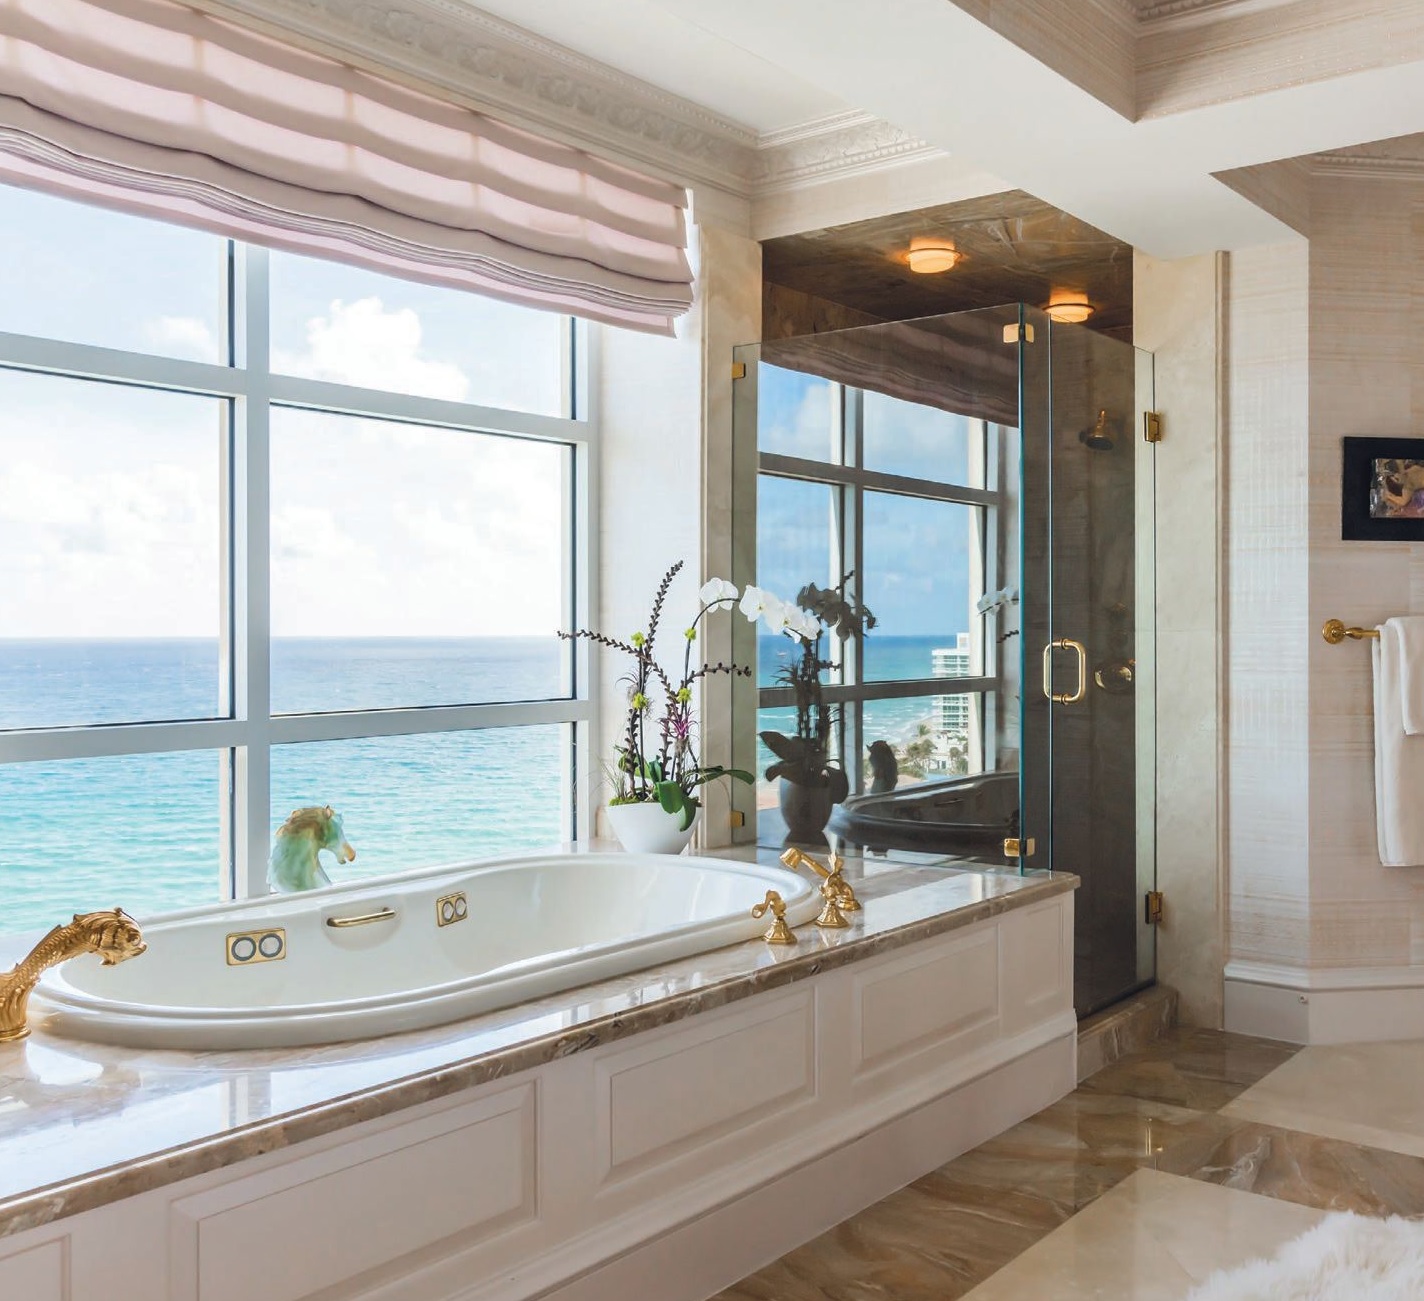 Her primary bath offers a front-row seat to the ocean. PHOTOGRAPHED BY VENJHAMIN REYES